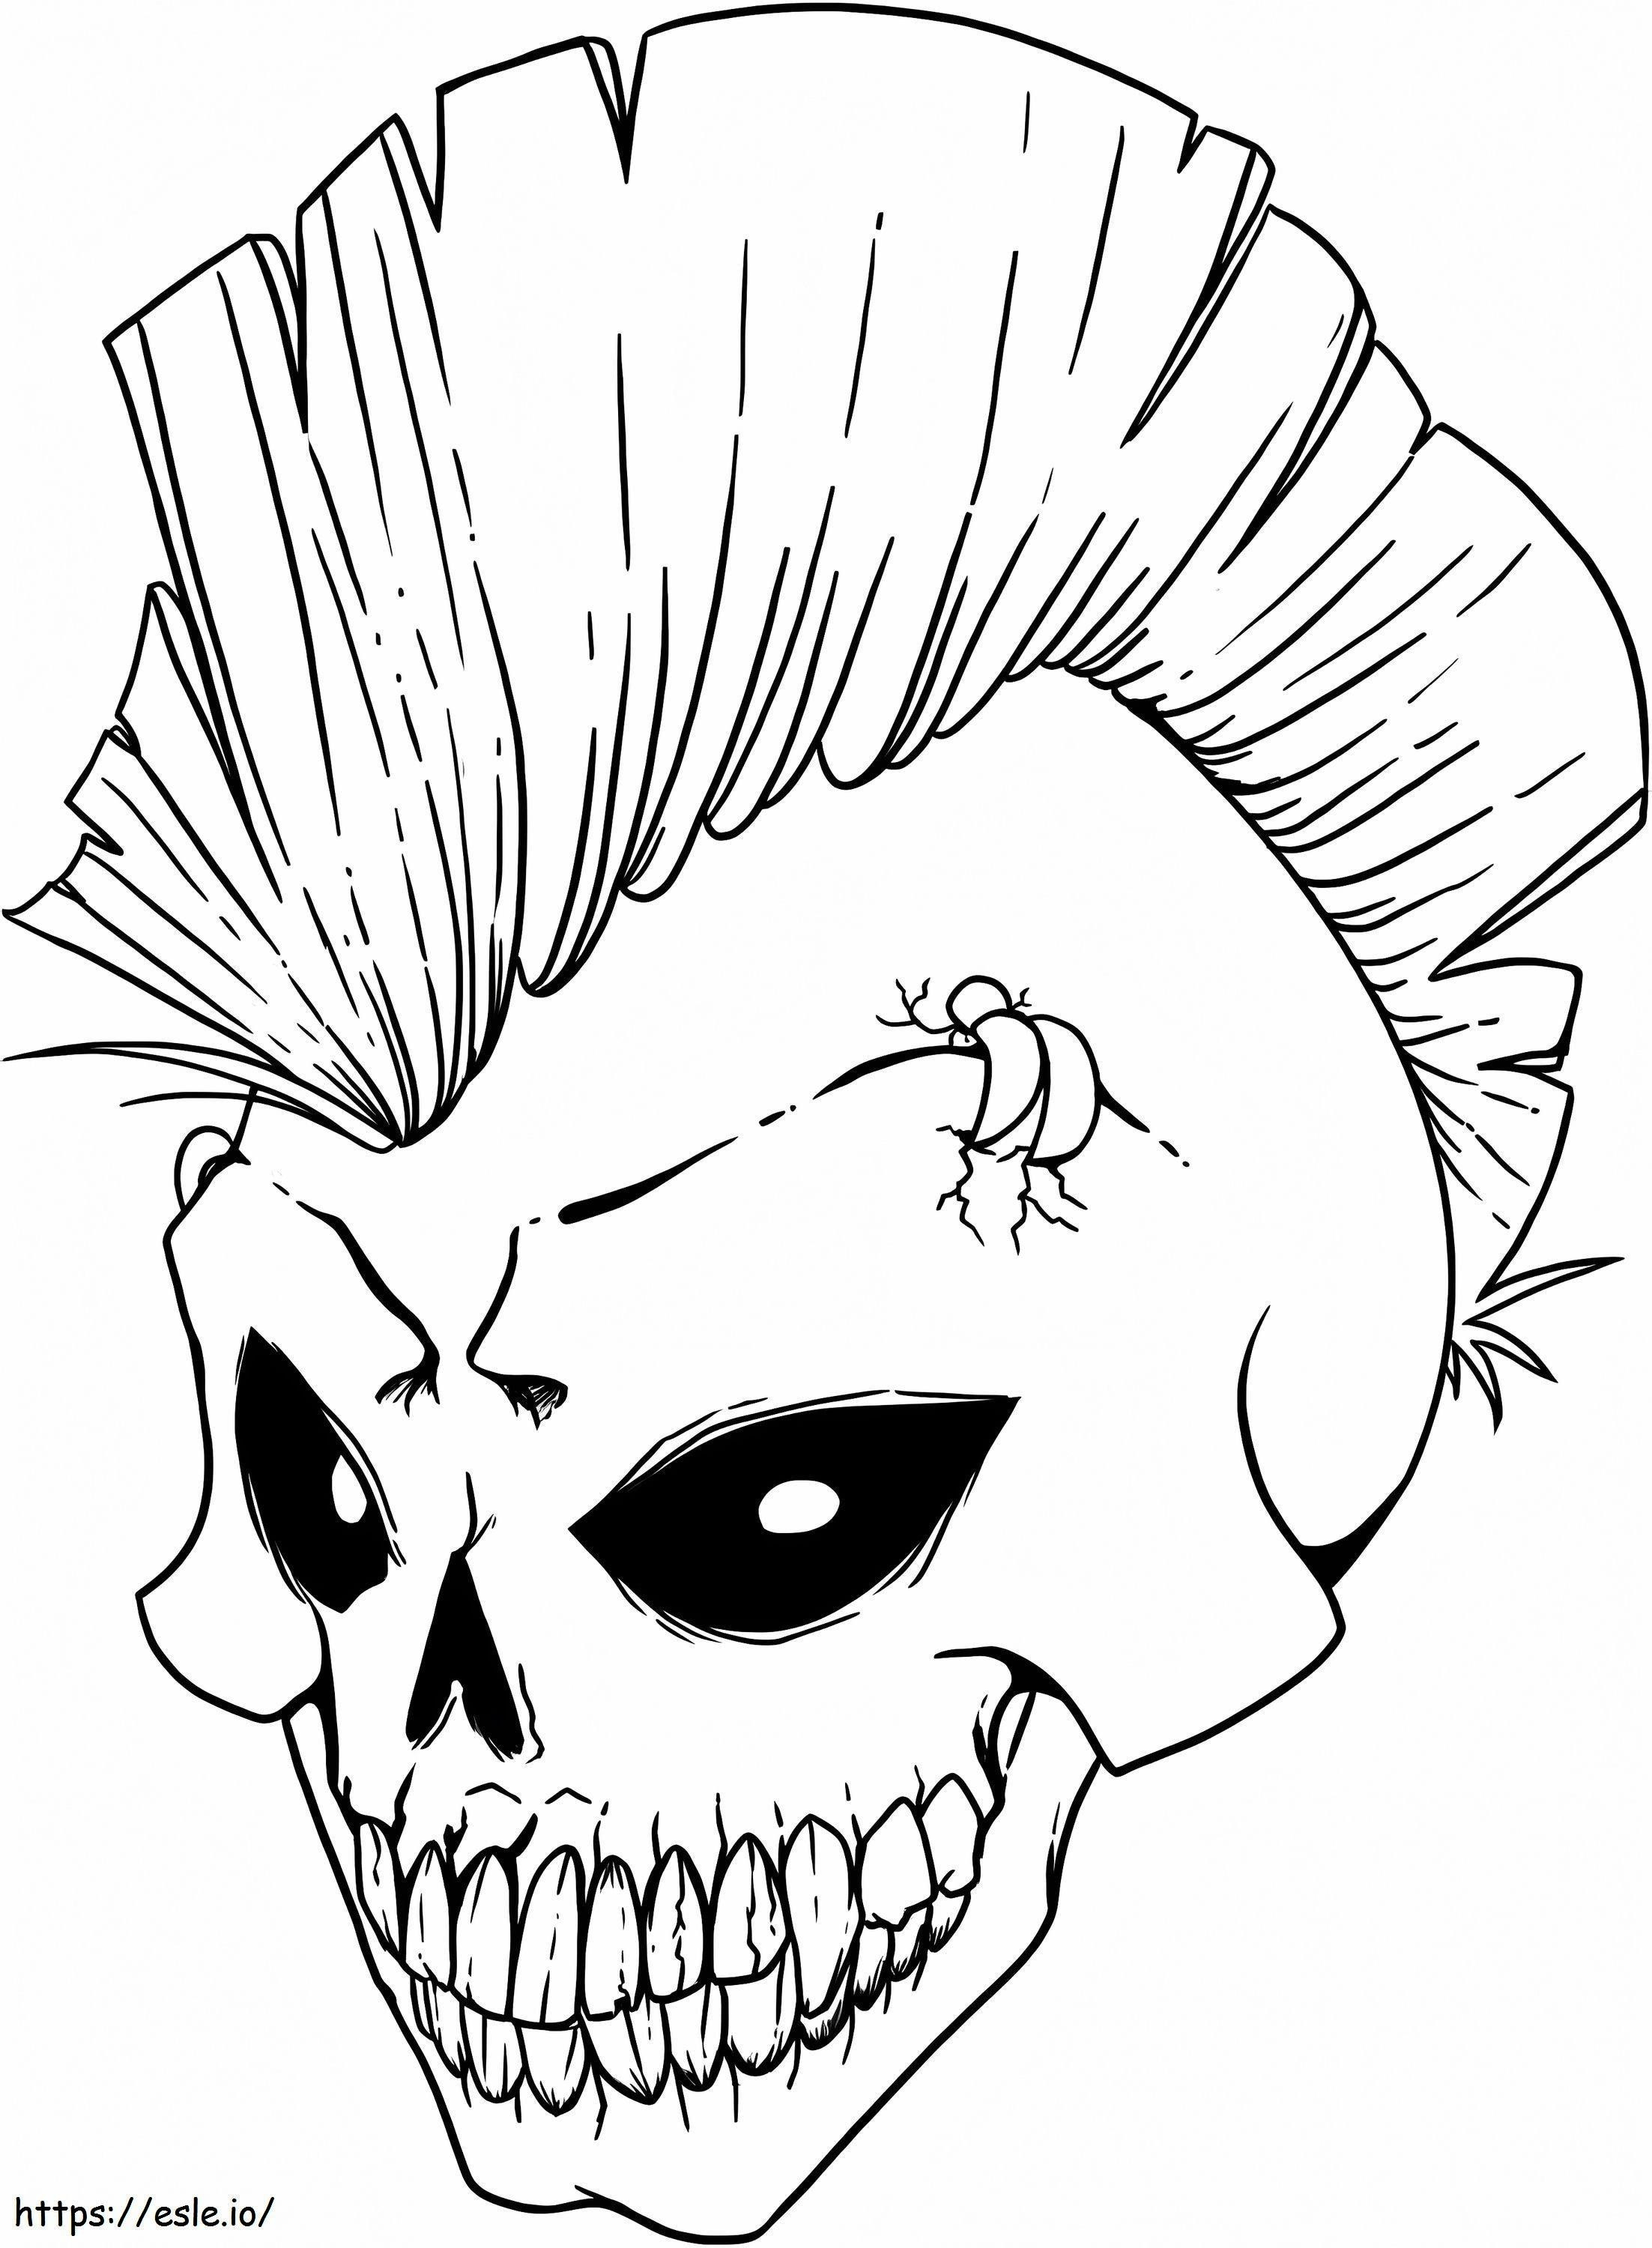 Cool Skulls coloring page